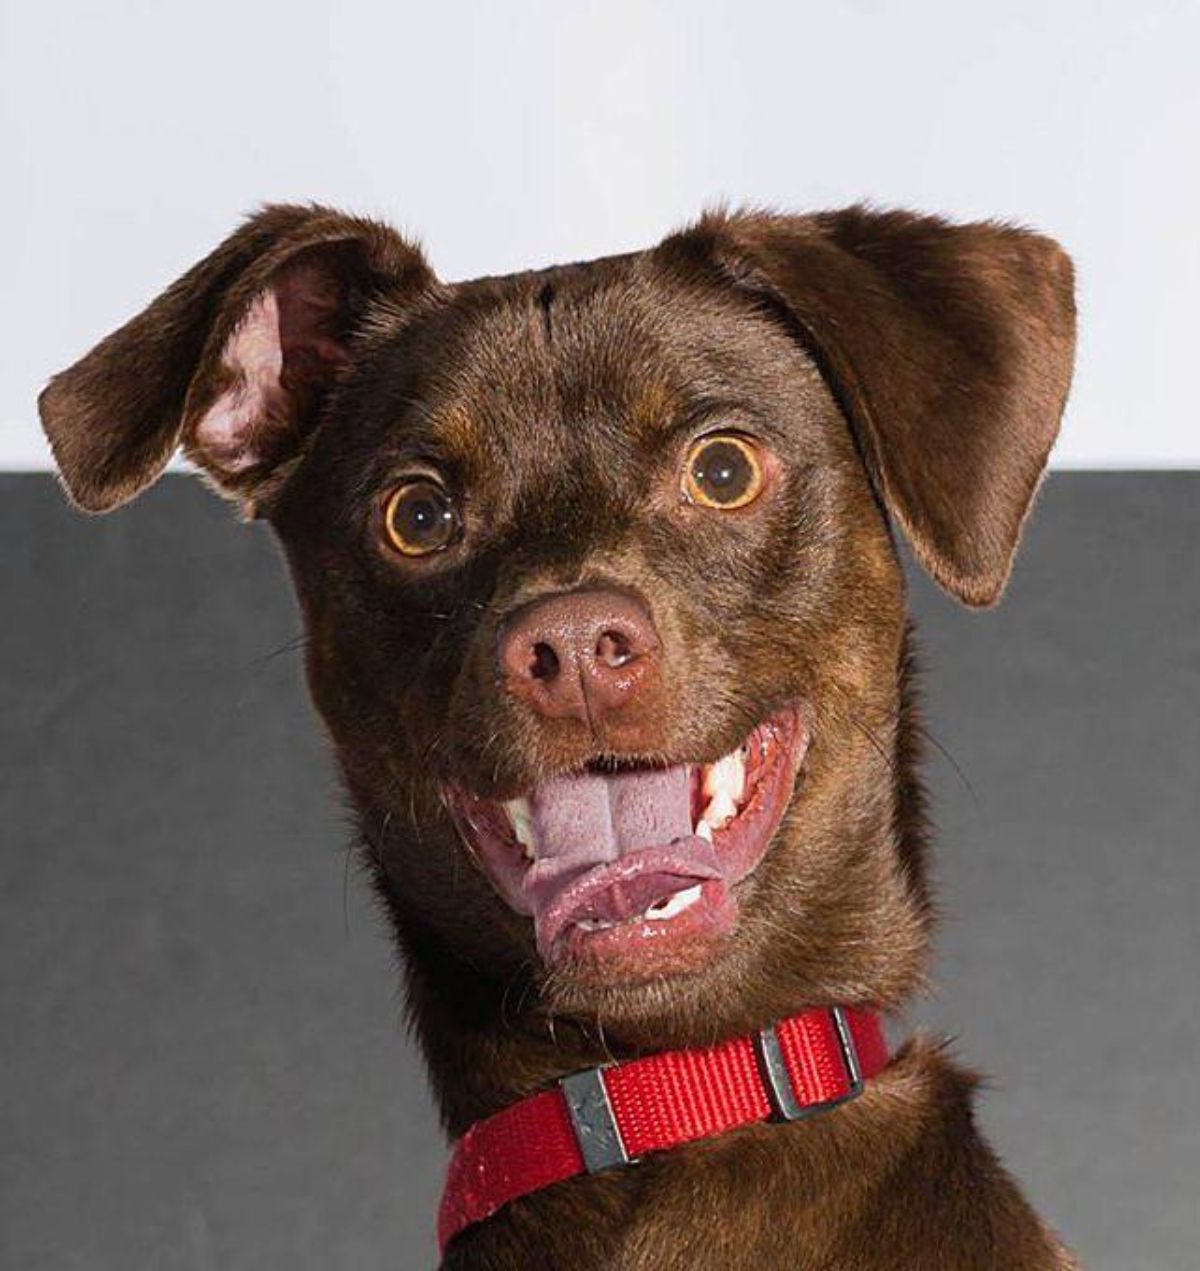 smiling brown dog with a red collar and the tongue sticking out